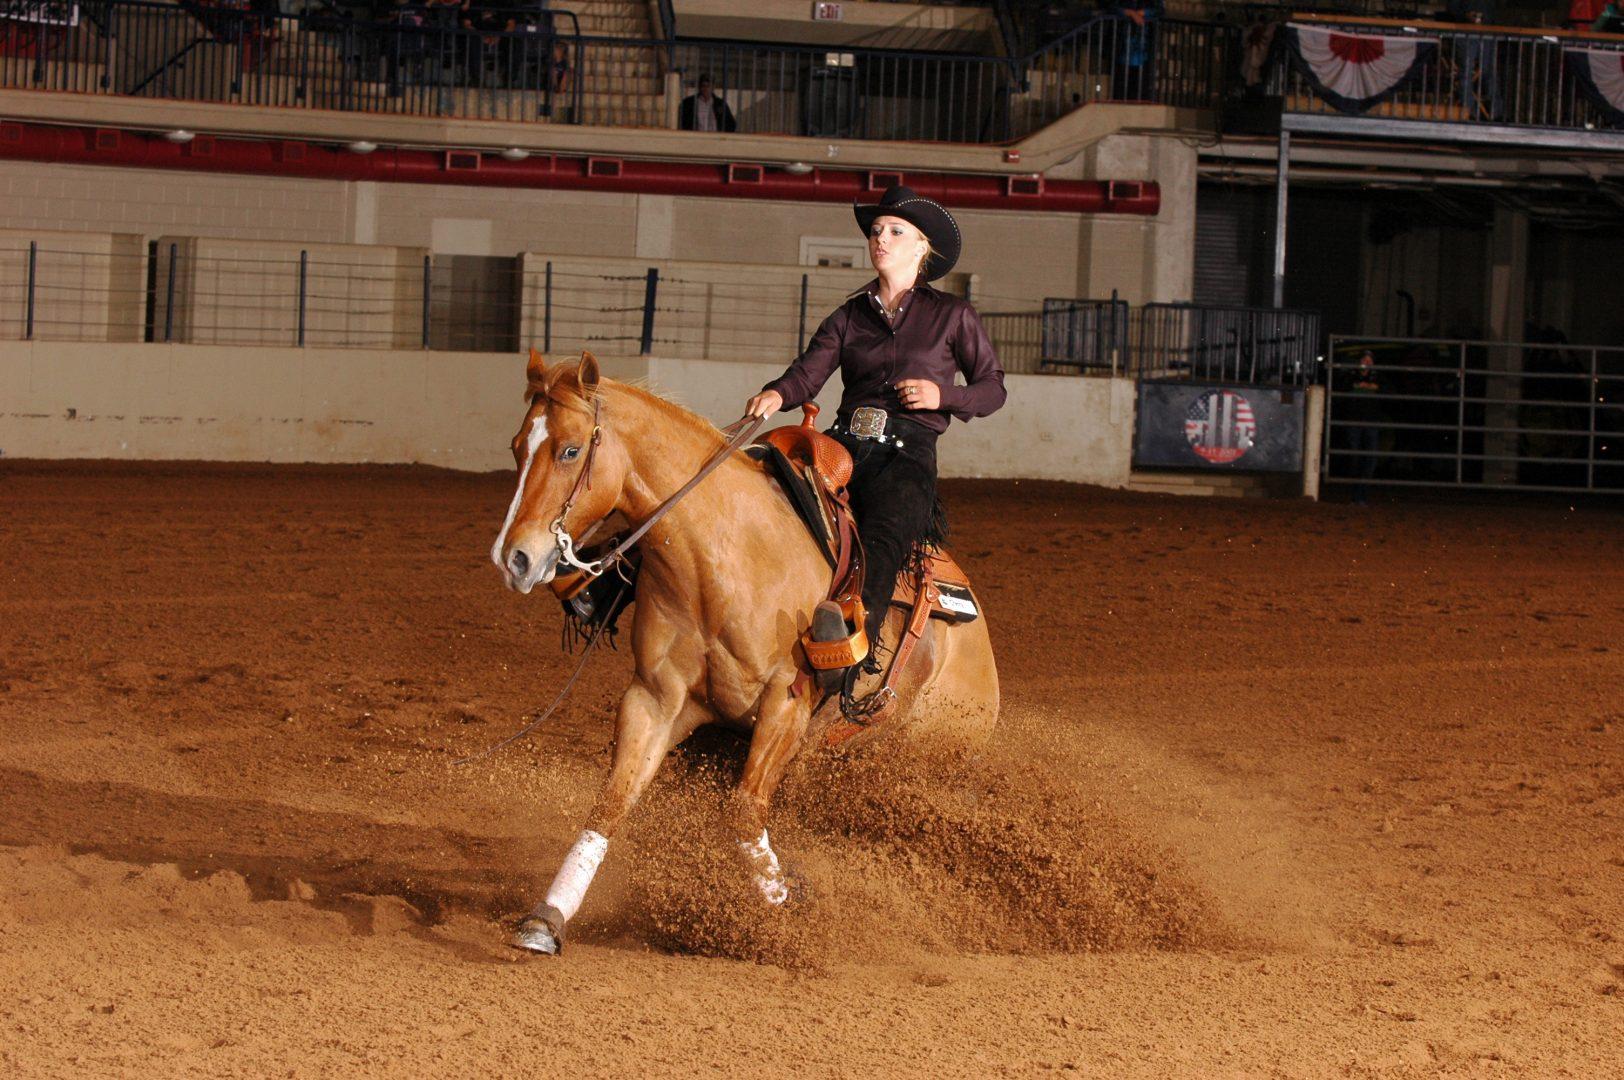 In+nine+competitions%2C+Taylor+Brown+has+been+selected+as+Most+Outstanding+Player.+She+is+also+undefeated+so+far+in+reining+and+horsemanship.+%28Courtesy+of+Fresno+State+Athletics%29